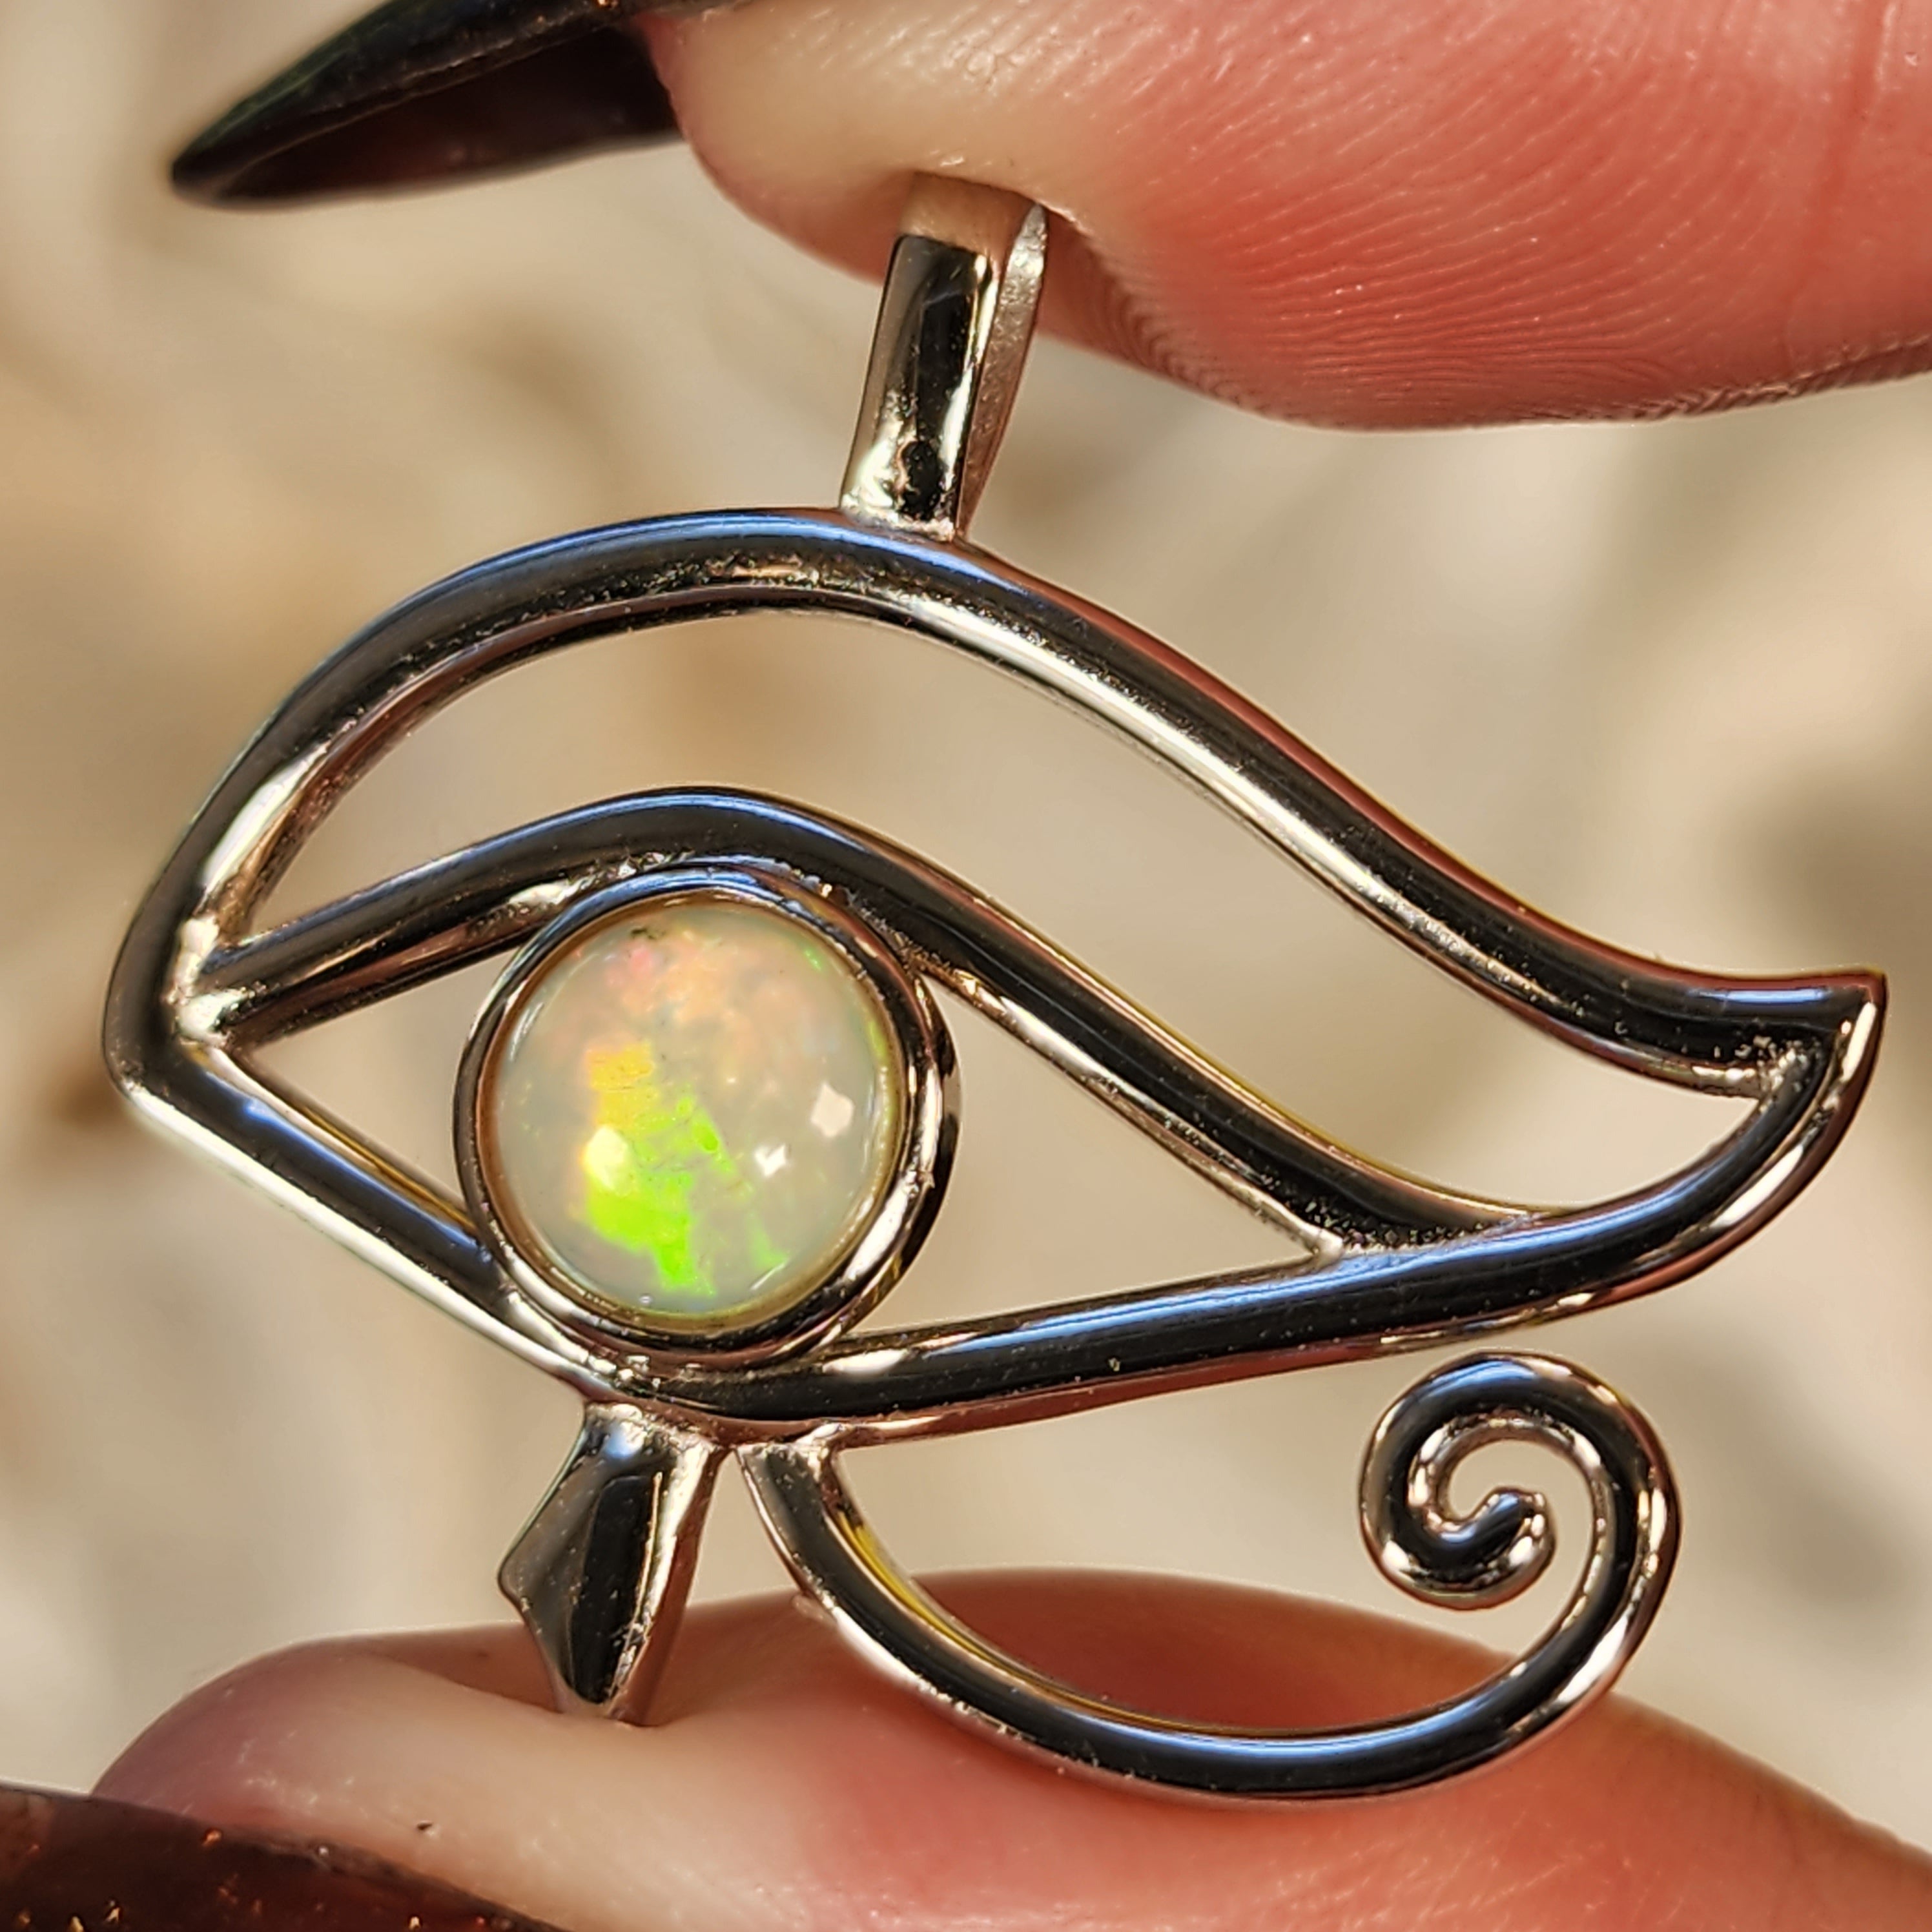 Ethiopian Opal Eye of Horus Amulet Pendant .925 Silver for Joy, Protection and Transformation